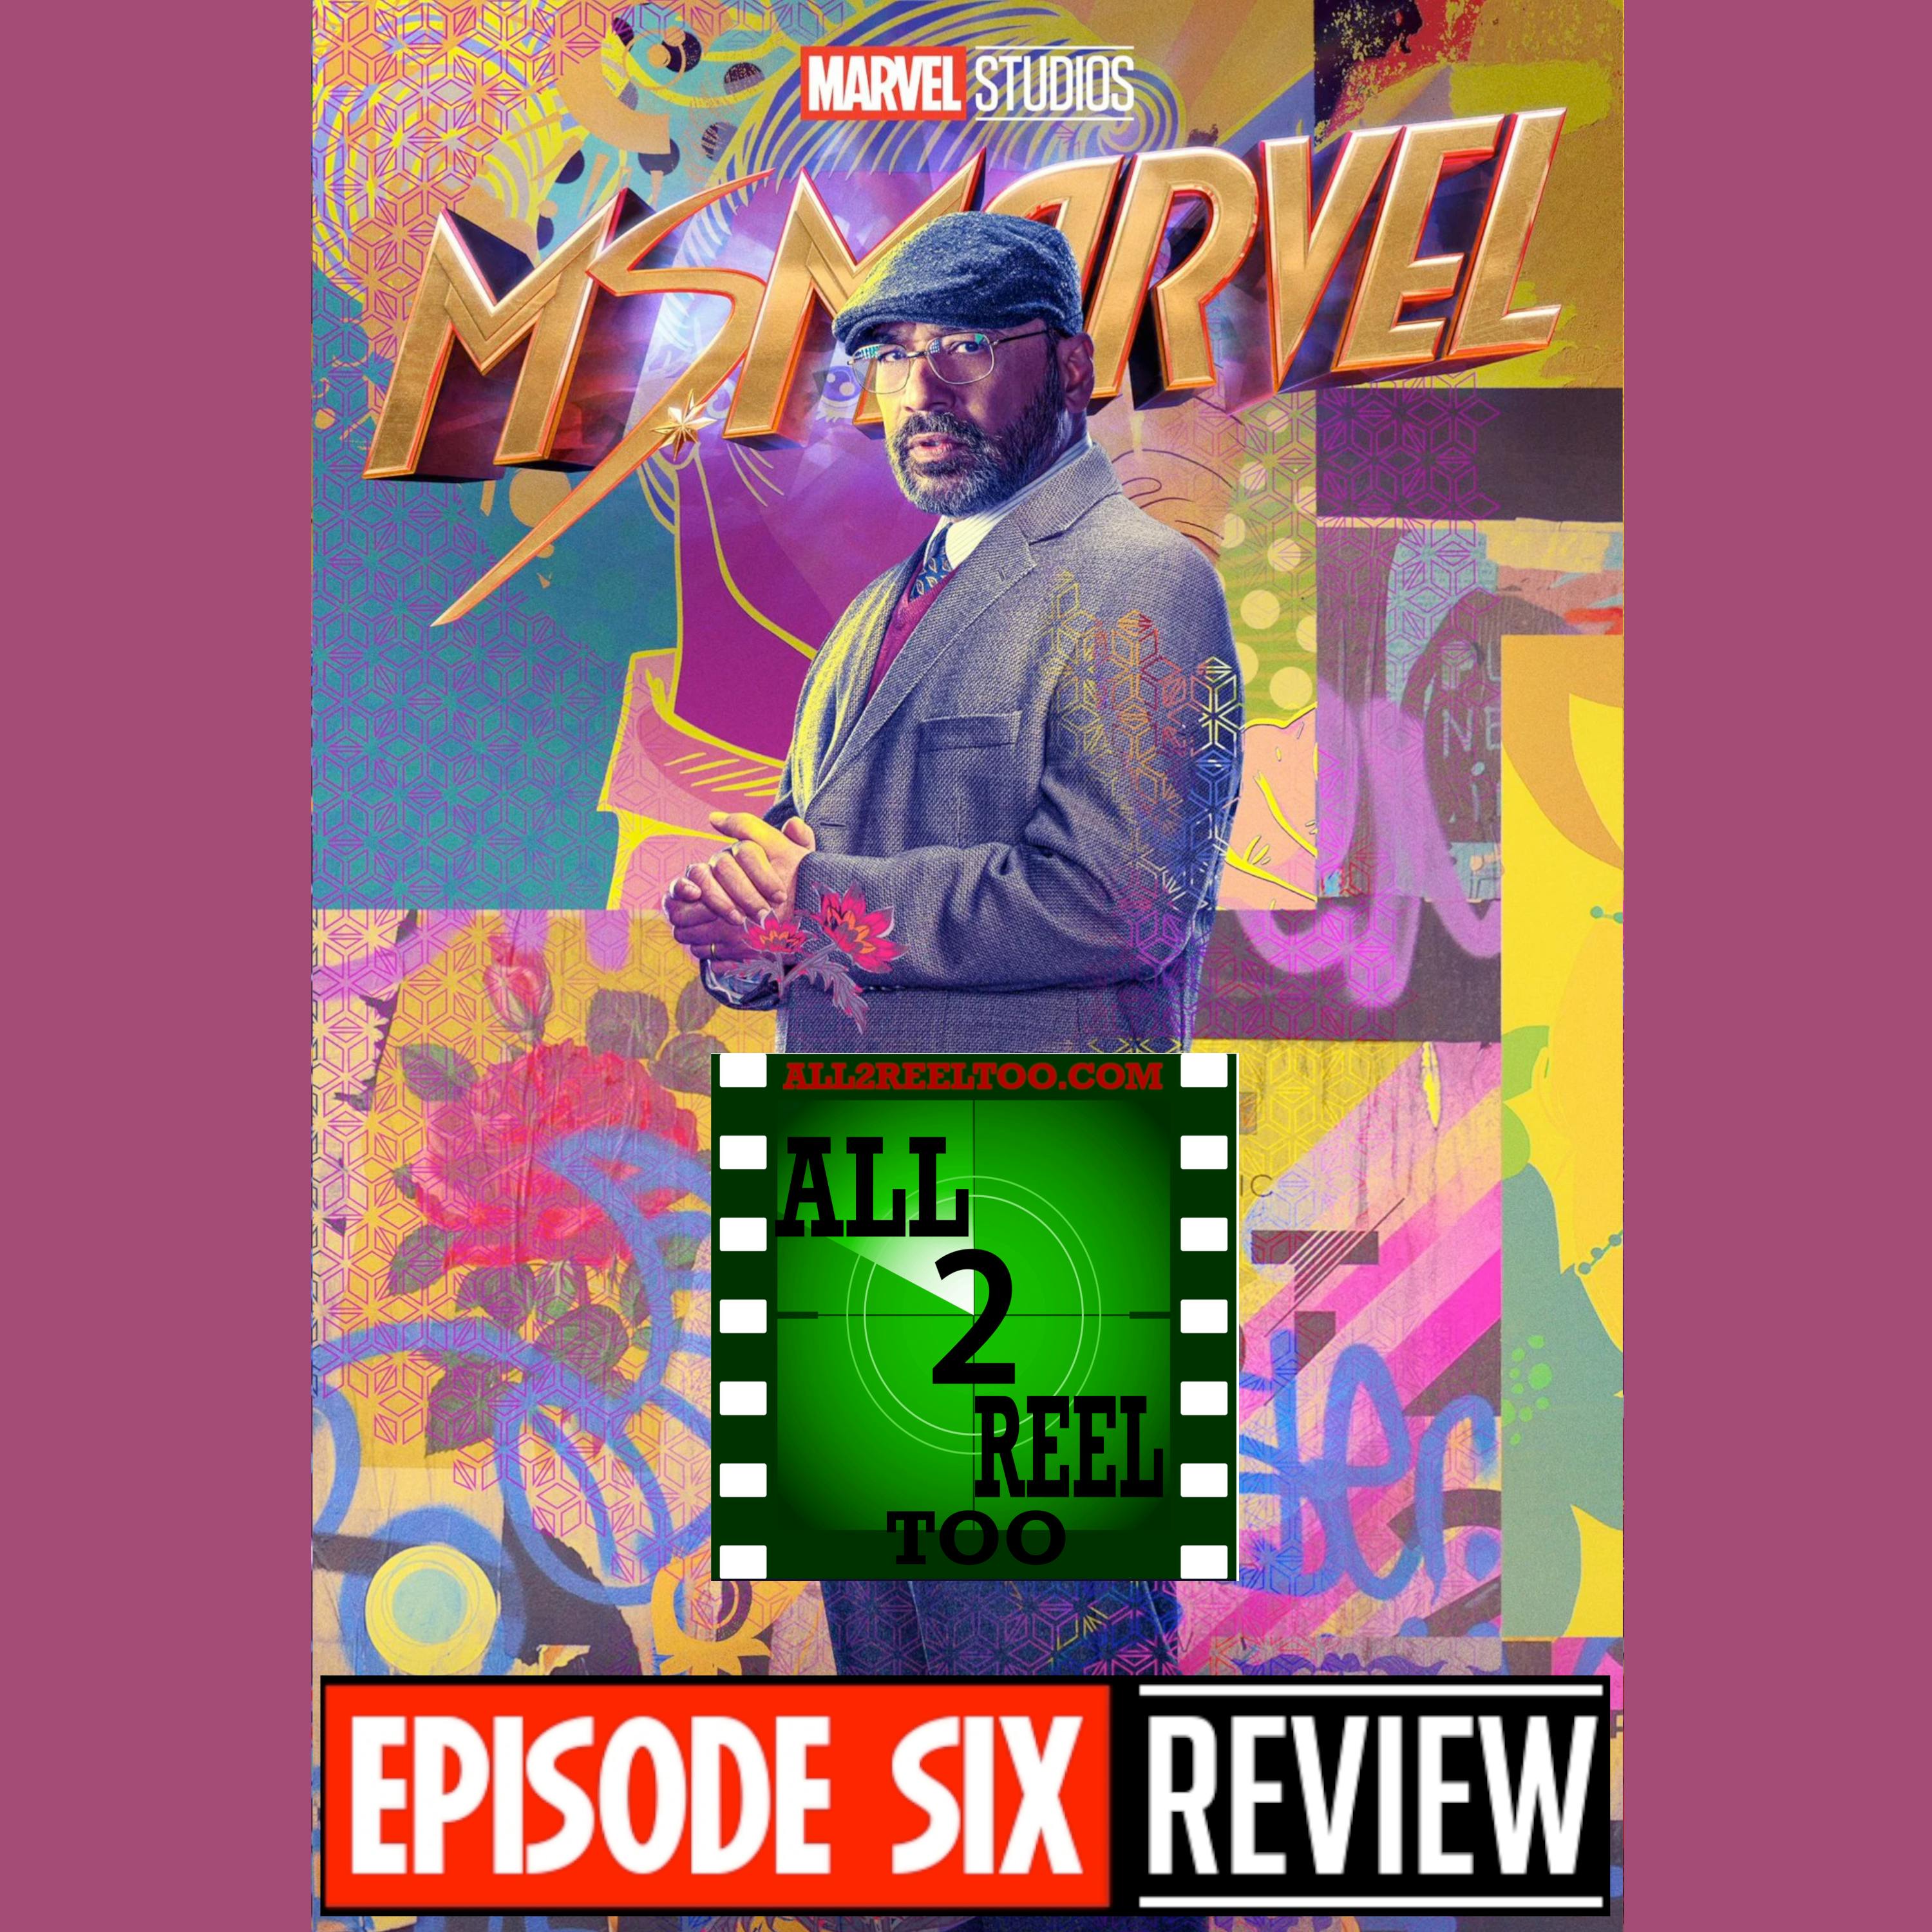 Ms. Marvel EPISODE 6 REVIEW Image